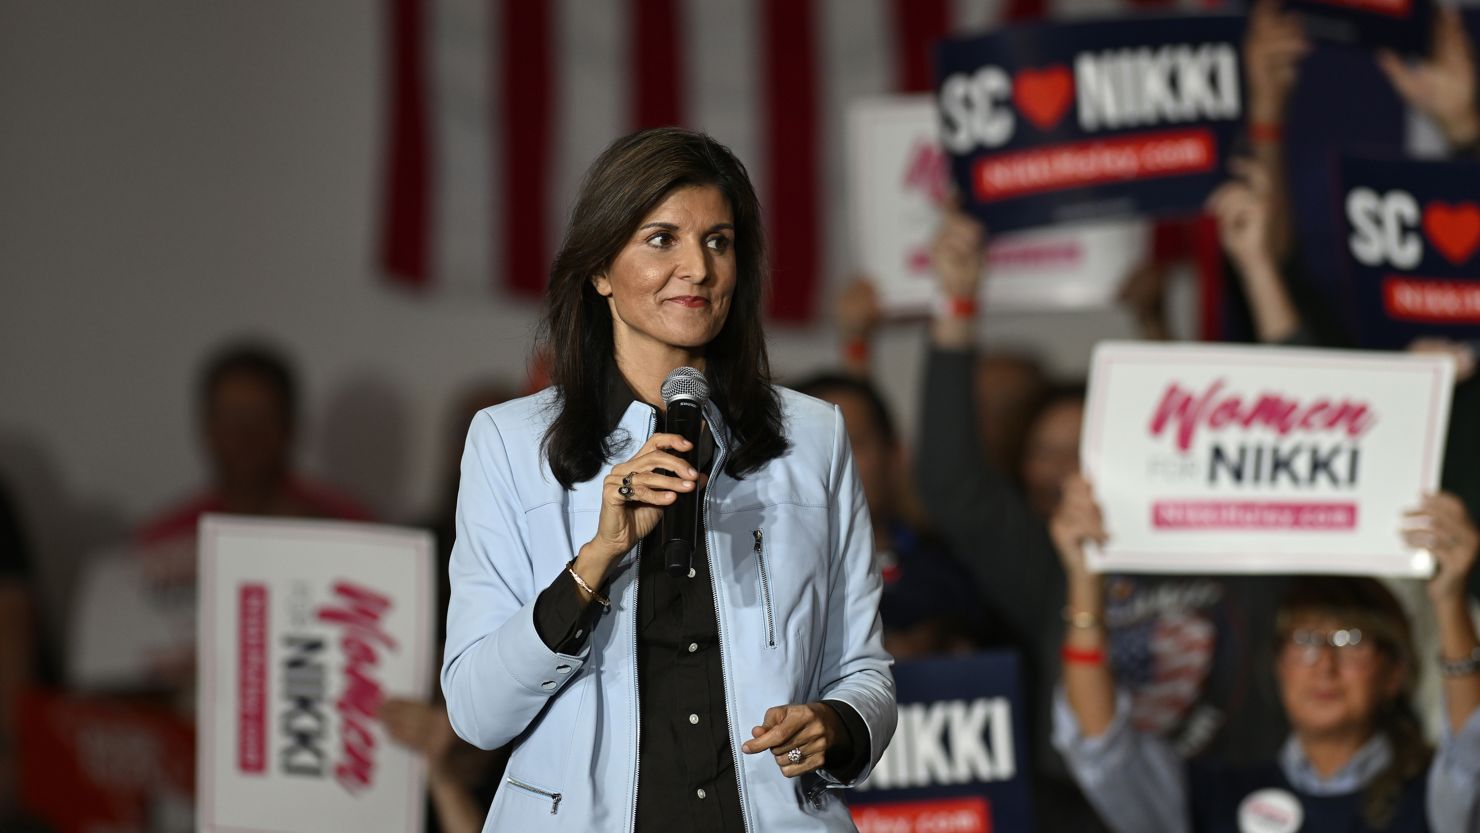 Nikki Haley Top Democratic donor gives 250k to support former South